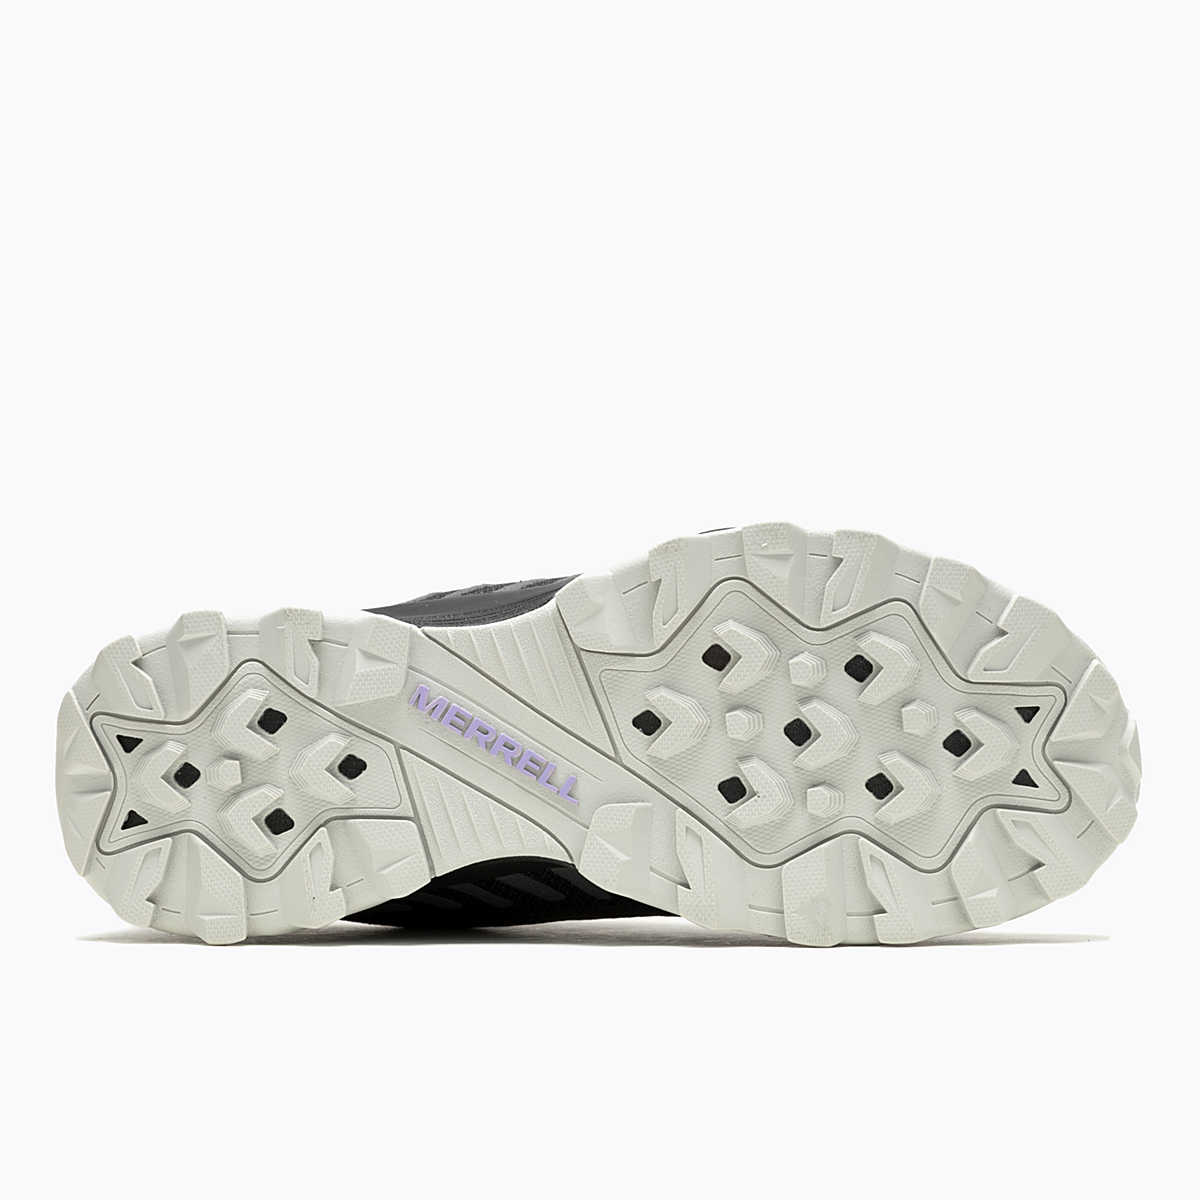 Merrell Women's Speed Eco Hiker in Charcoal/Orchid